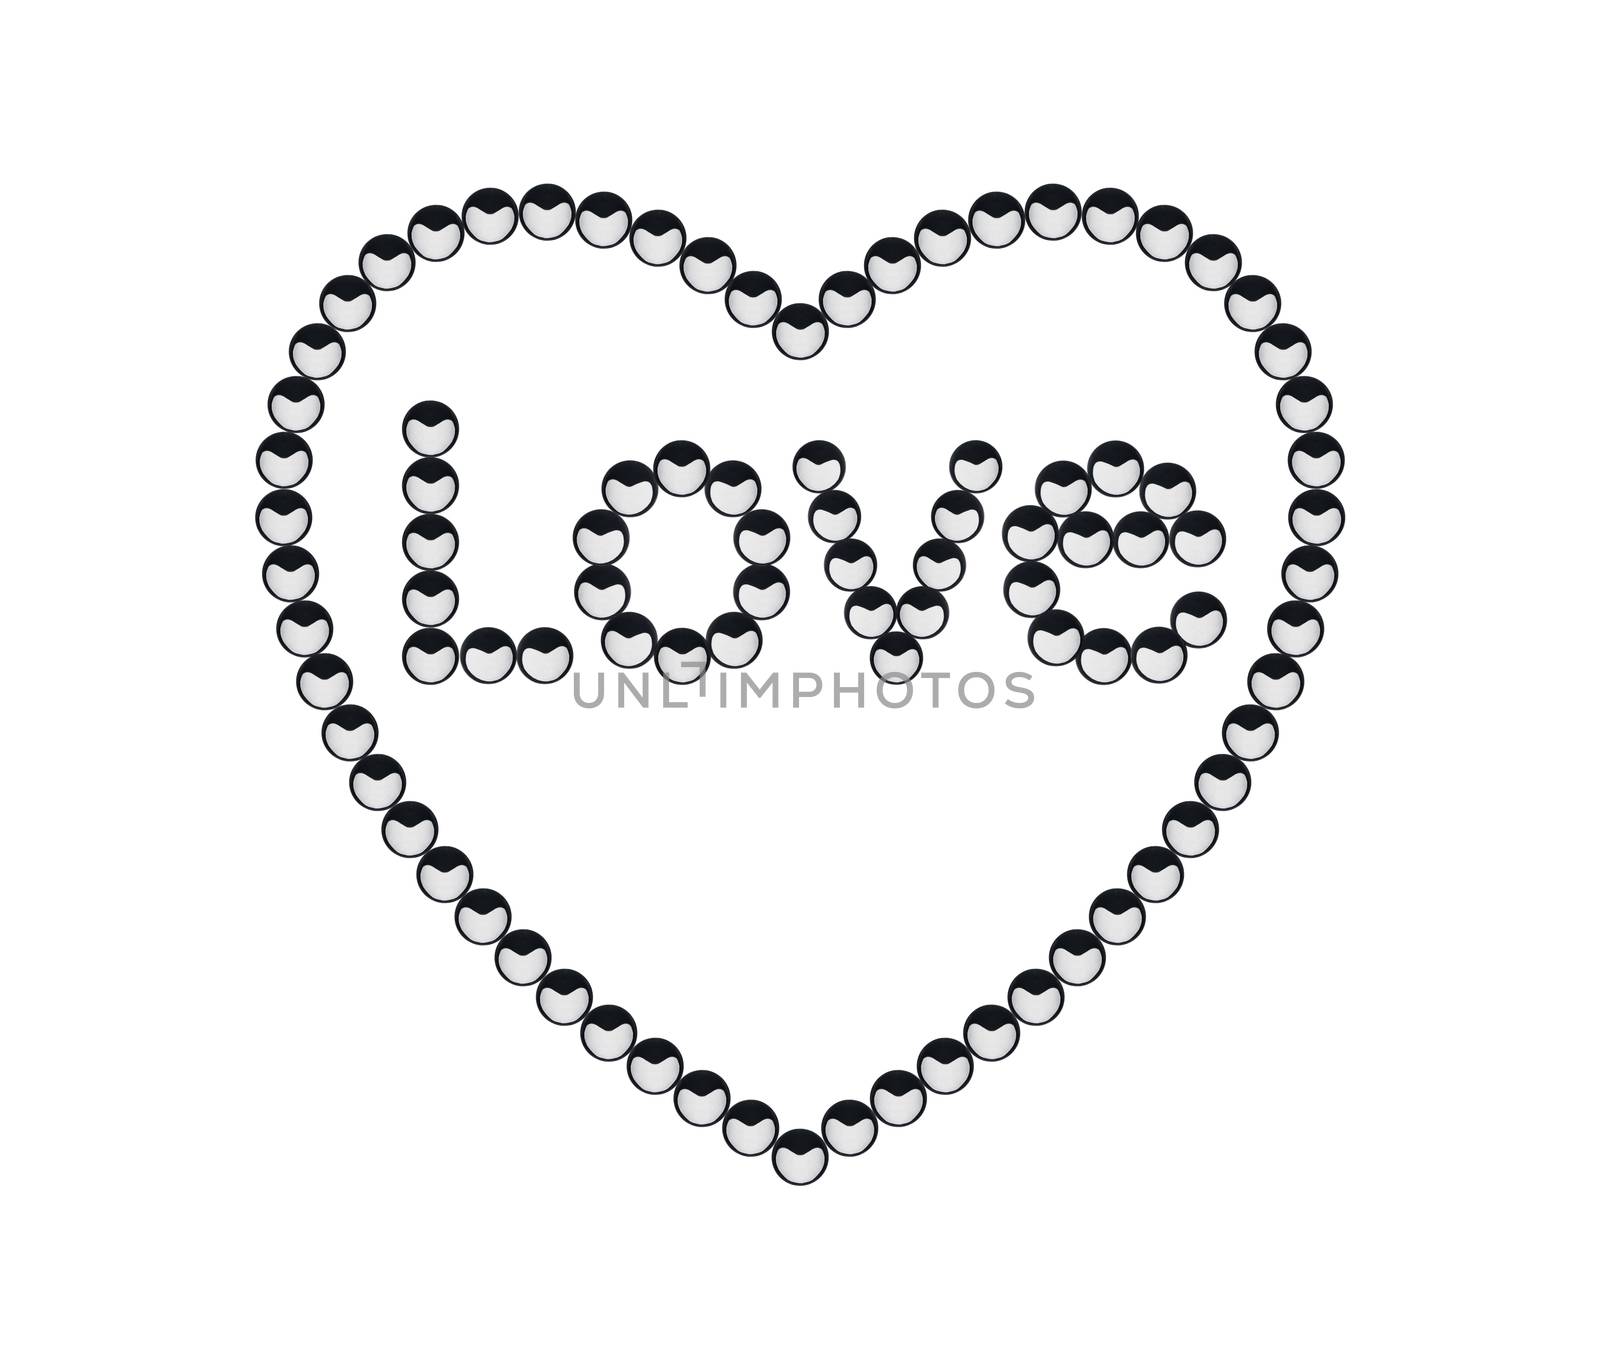 Love in a puff plant seeds with heart curve on seed arranged in love letter in heart border